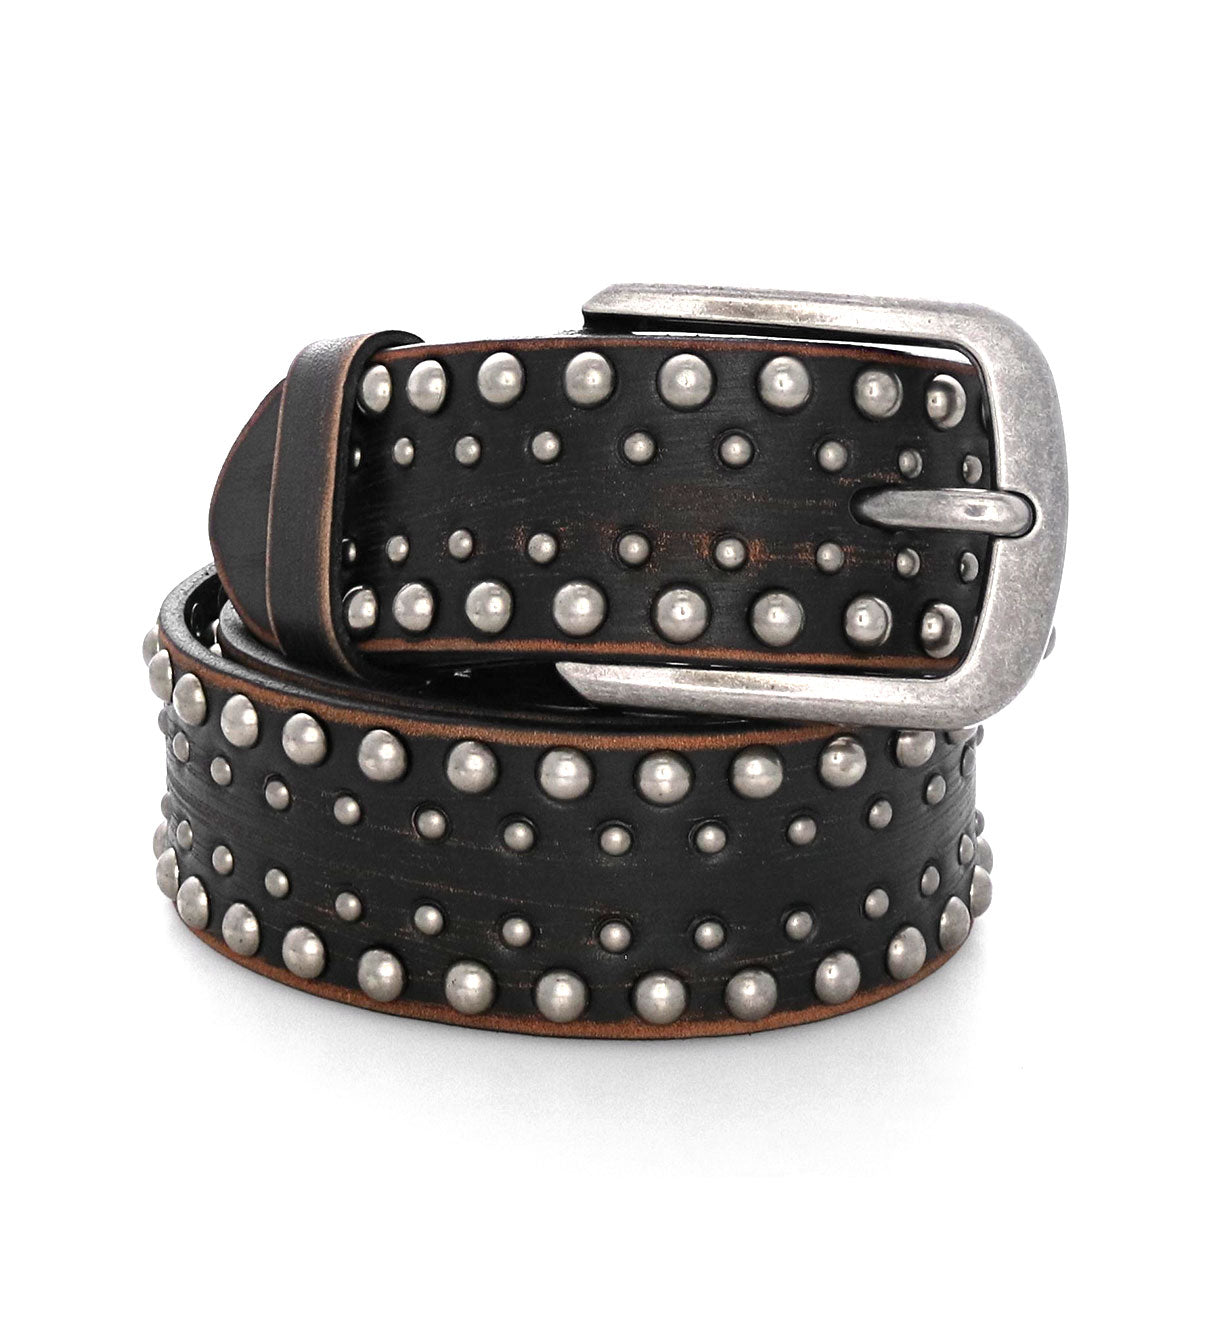 A Cristal black leather belt with silver studding by Bed Stu.